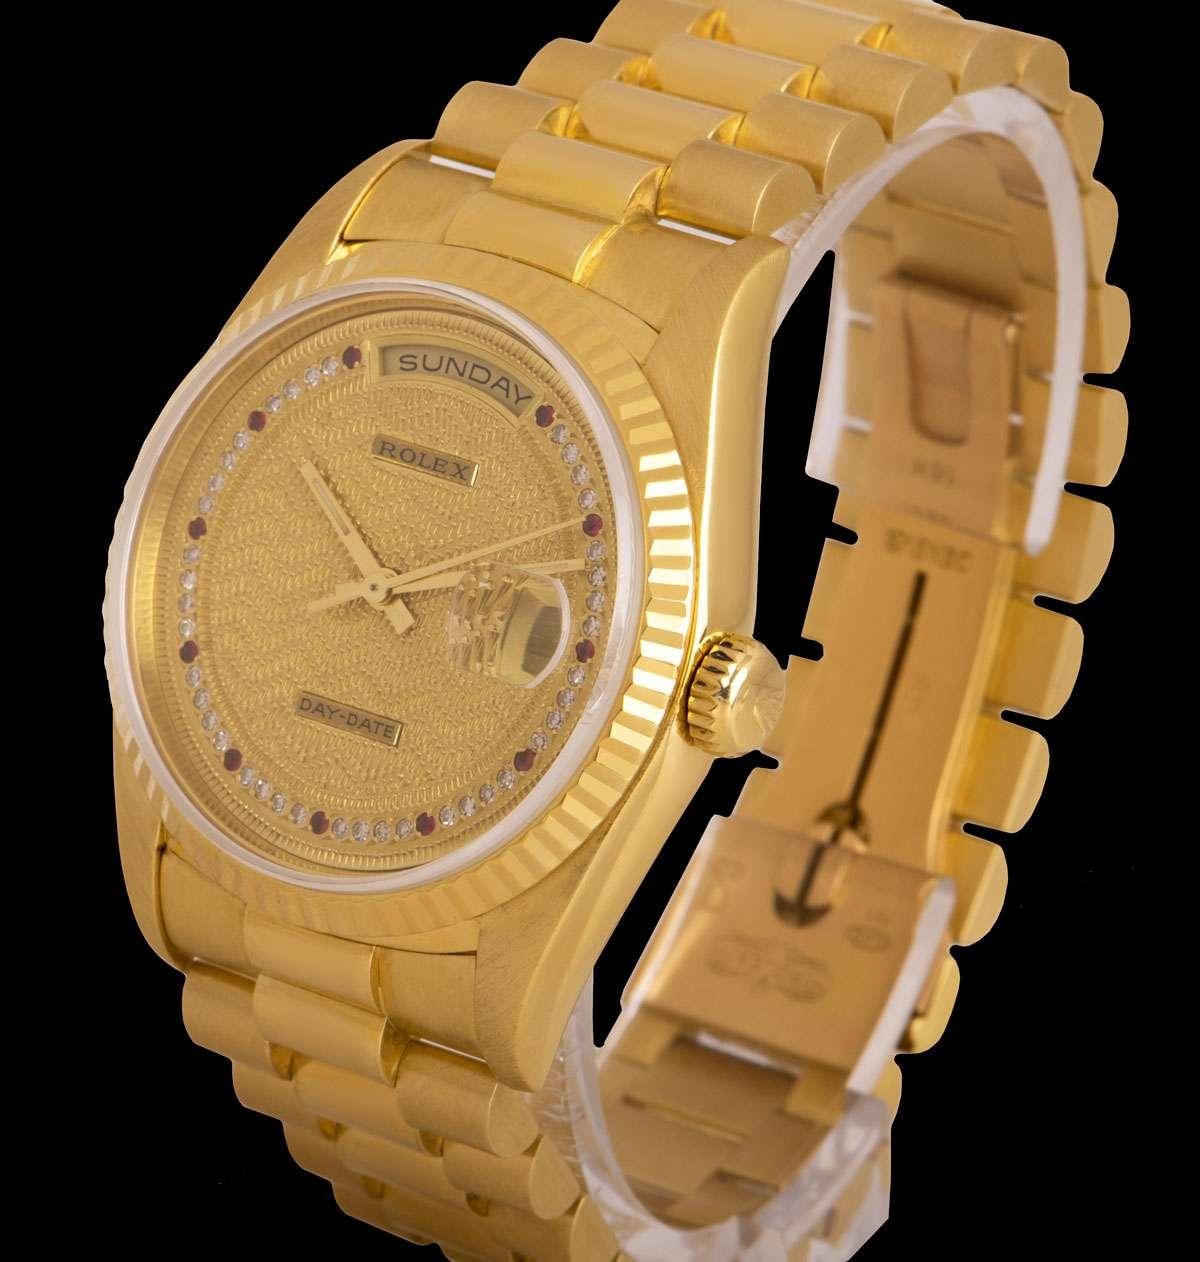 A 36 mm Very Rare 18k Yellow Gold Oyster Perpetual Day-Date Gents Wristwatch, decorated champagne dial set with a string of 40 applied round brilliant cut diamonds and 11 applied ruby hour markers, day at 12 0'clock, date at 3 0'clock, a fixed 18k